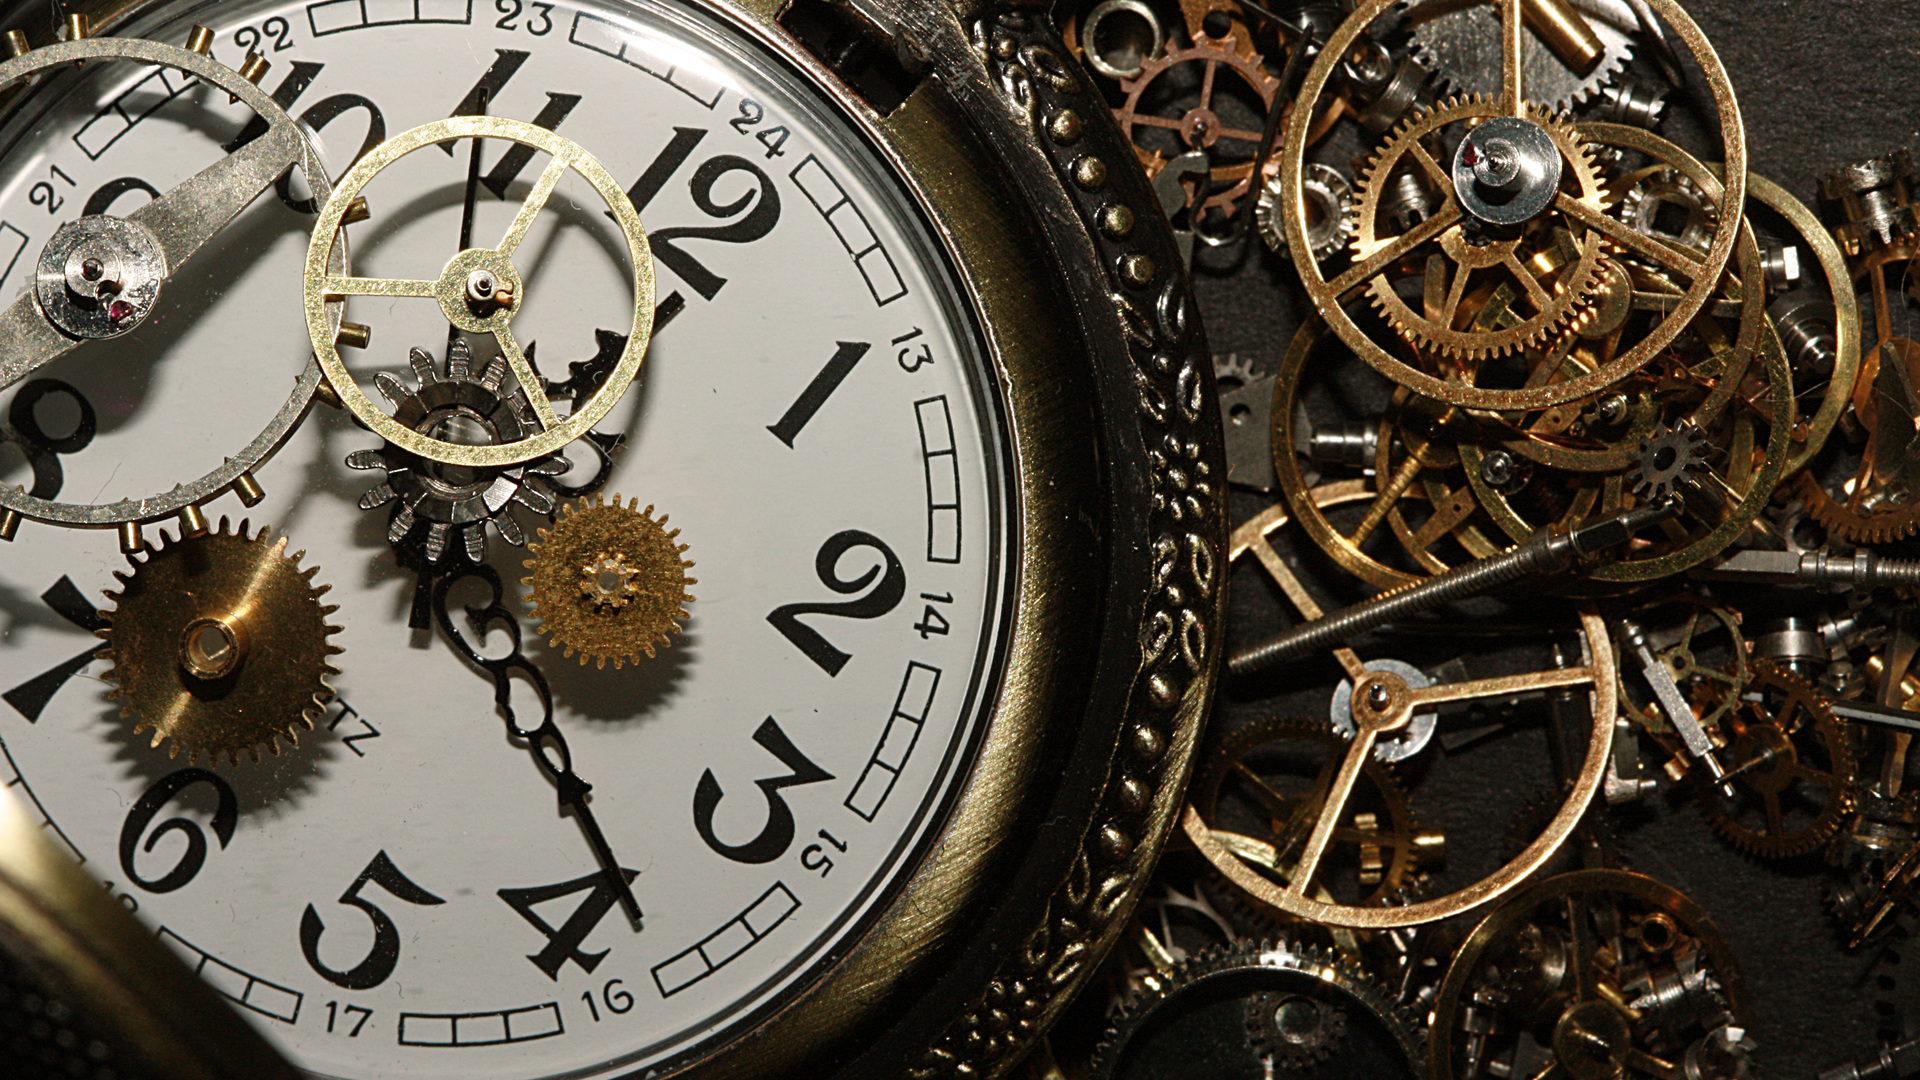 gears, Wheels, Watches, Detailed, Close up, Faces, Numbers, Photography, Metal, Artistic Wallpaper